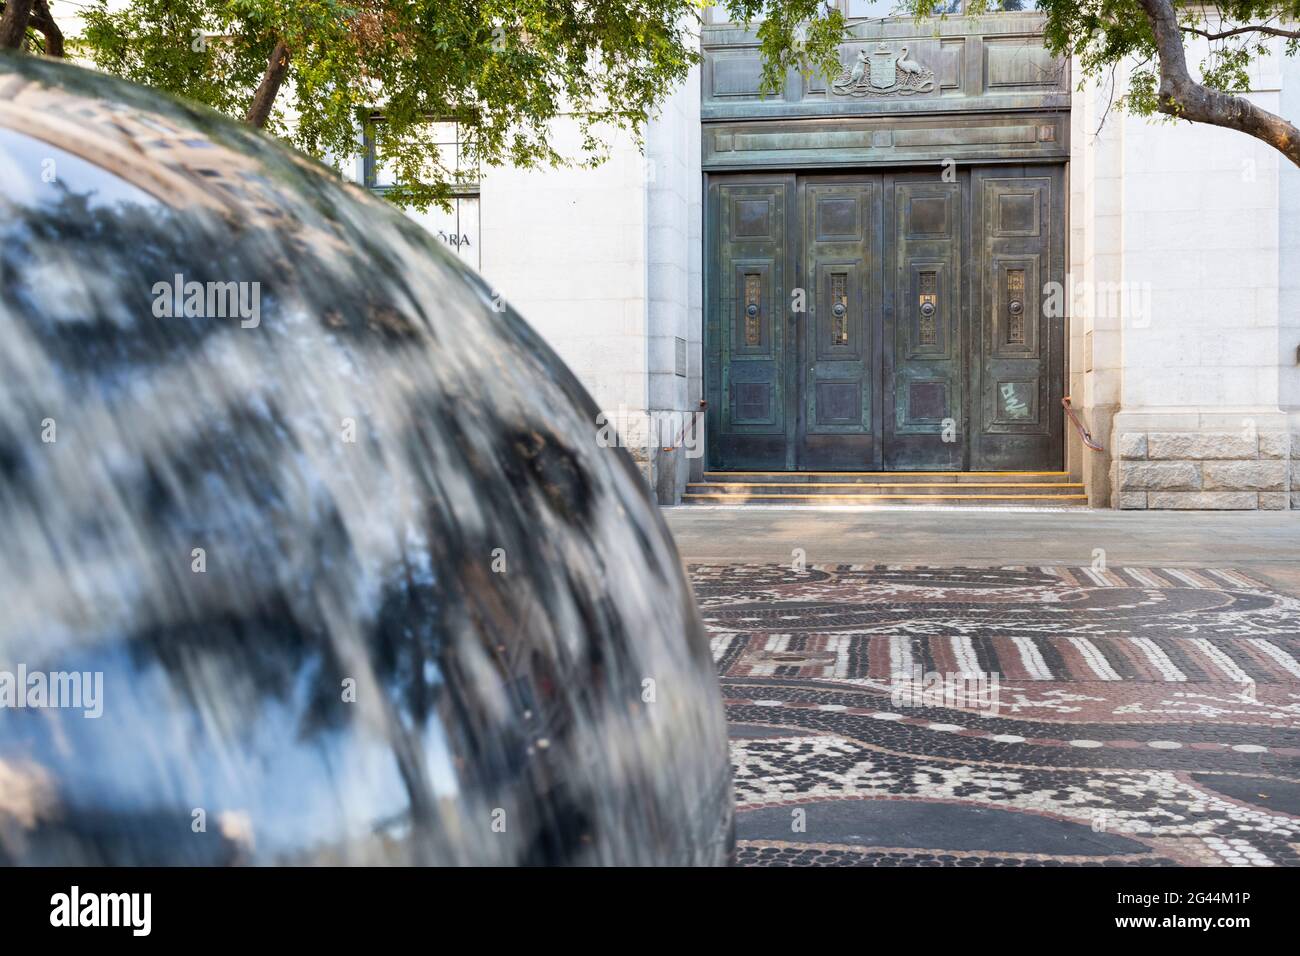 Rotating blurred rock sphere in Forrest Chase with historic doorway. Stock Photo